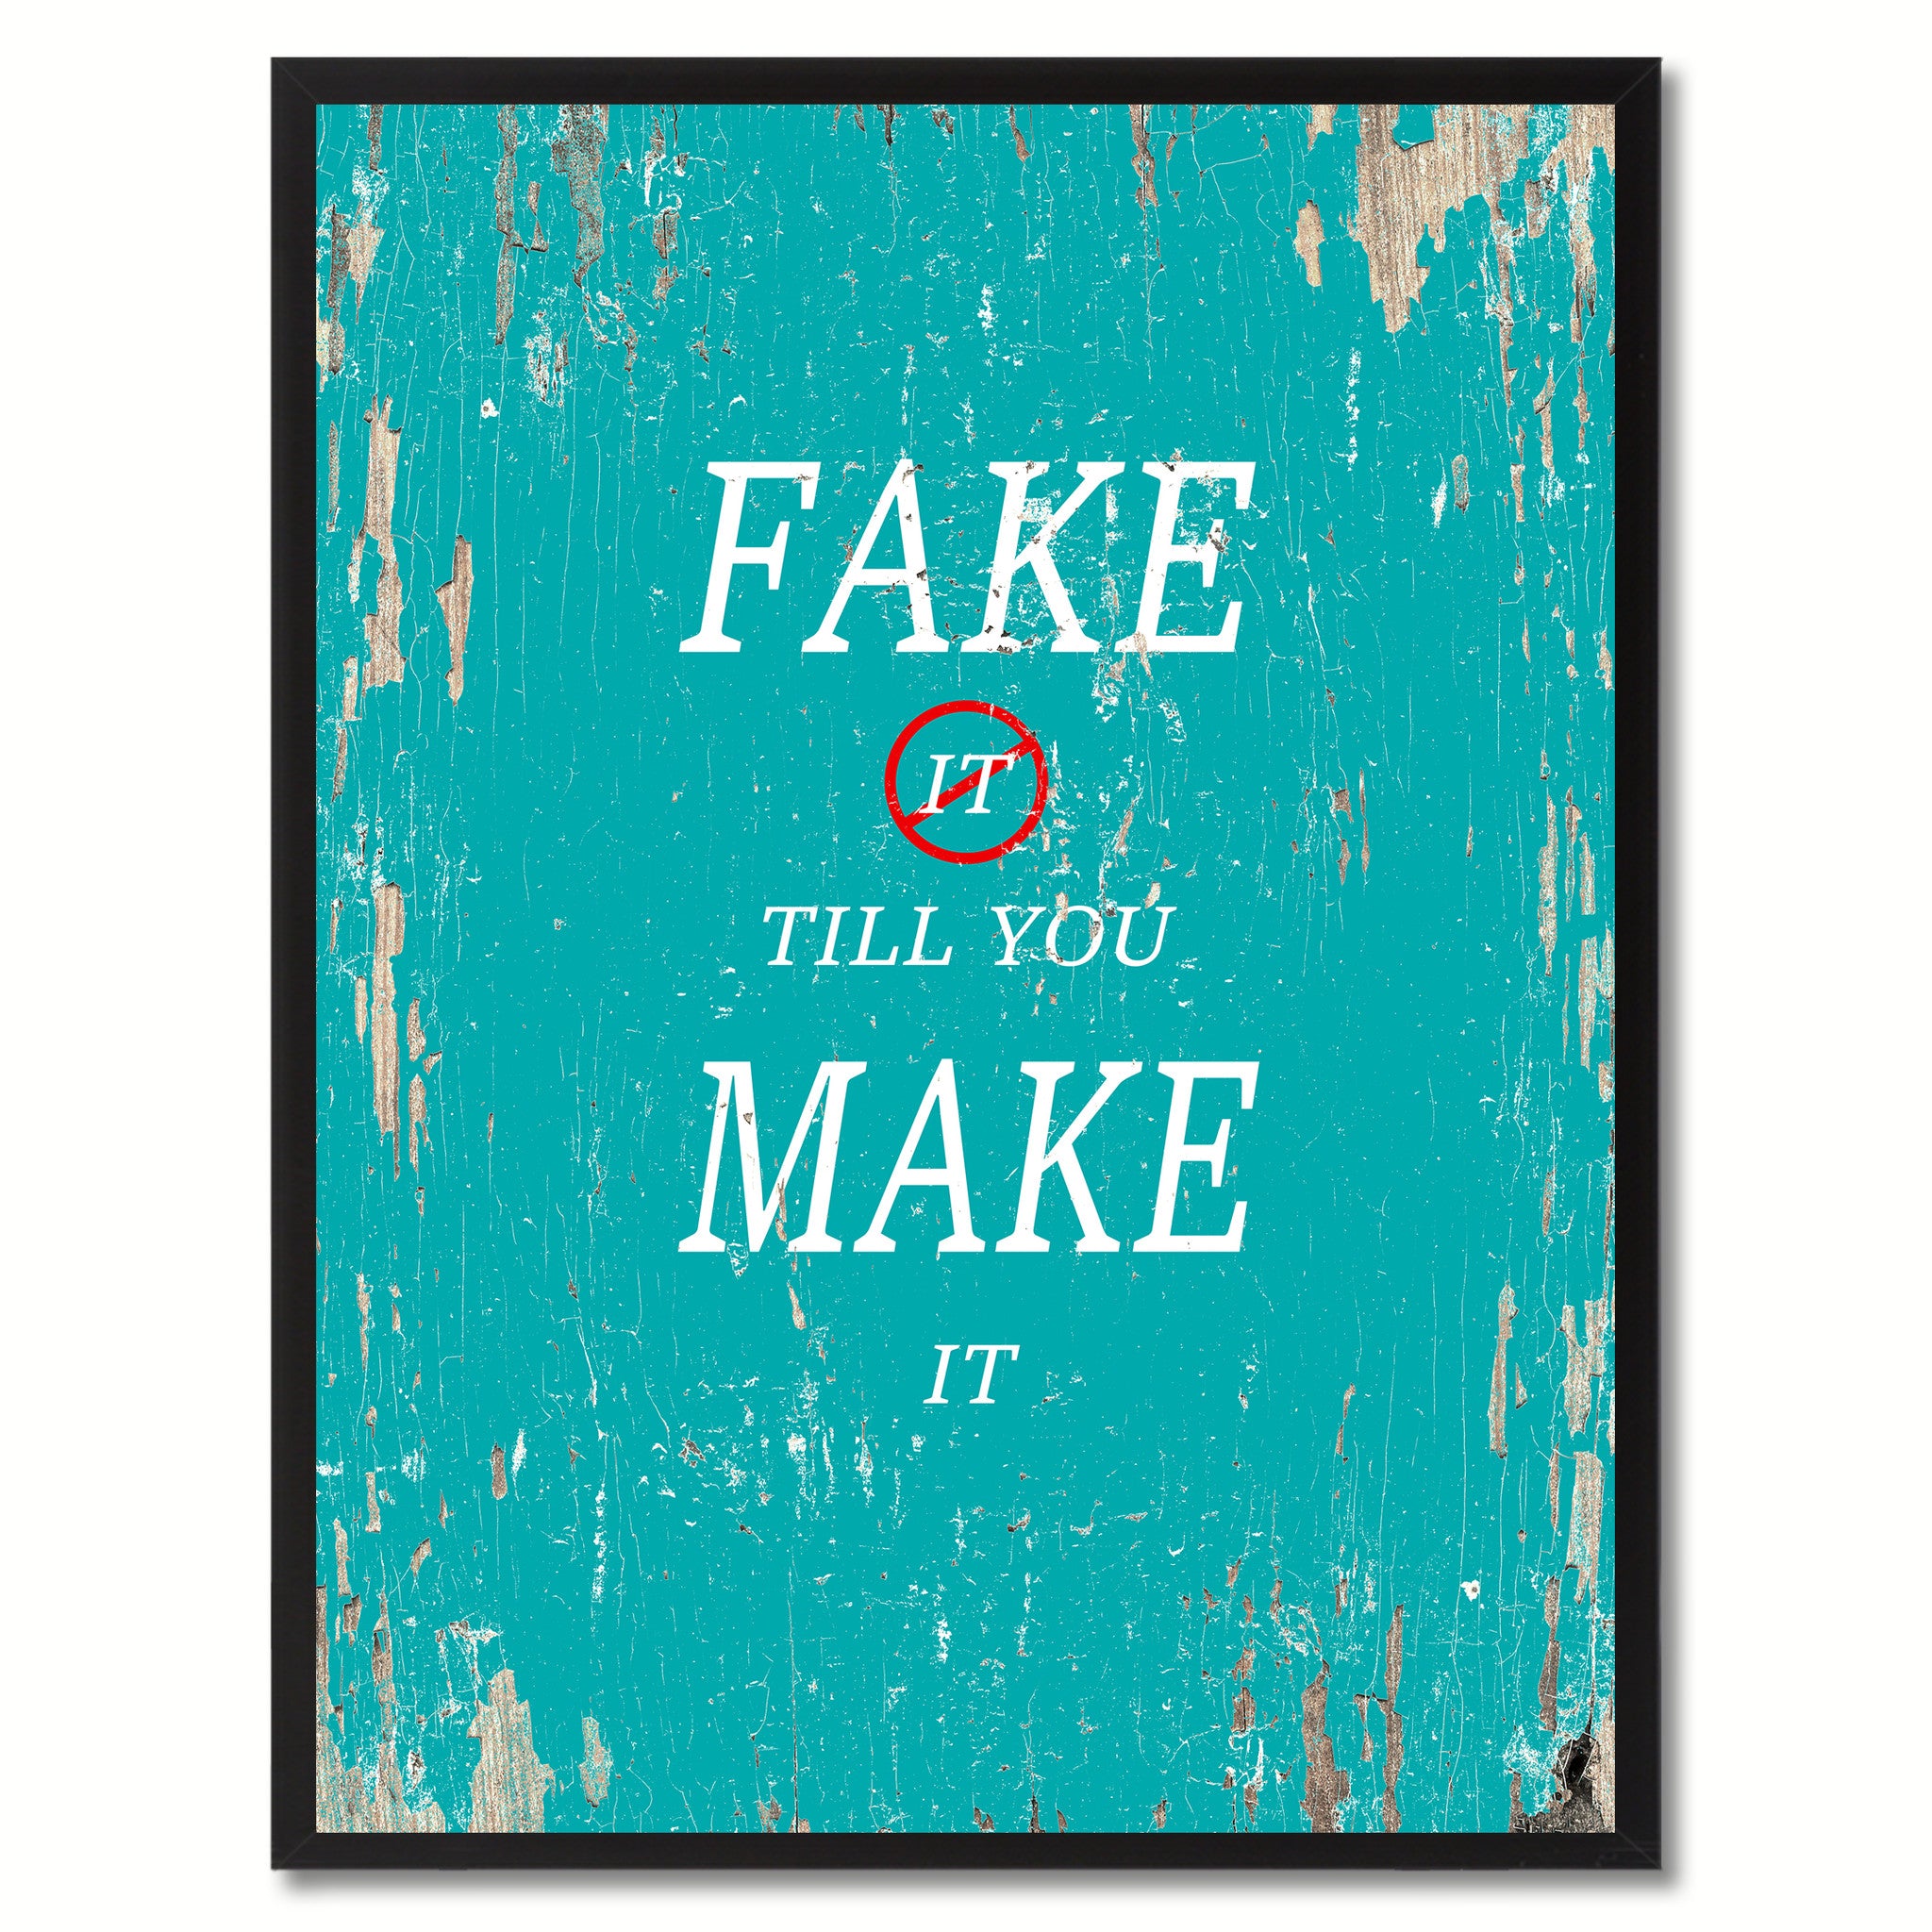 Fake It Till You Make It Saying Canvas Print, Black Picture Frame Home Decor Wall Art Gifts